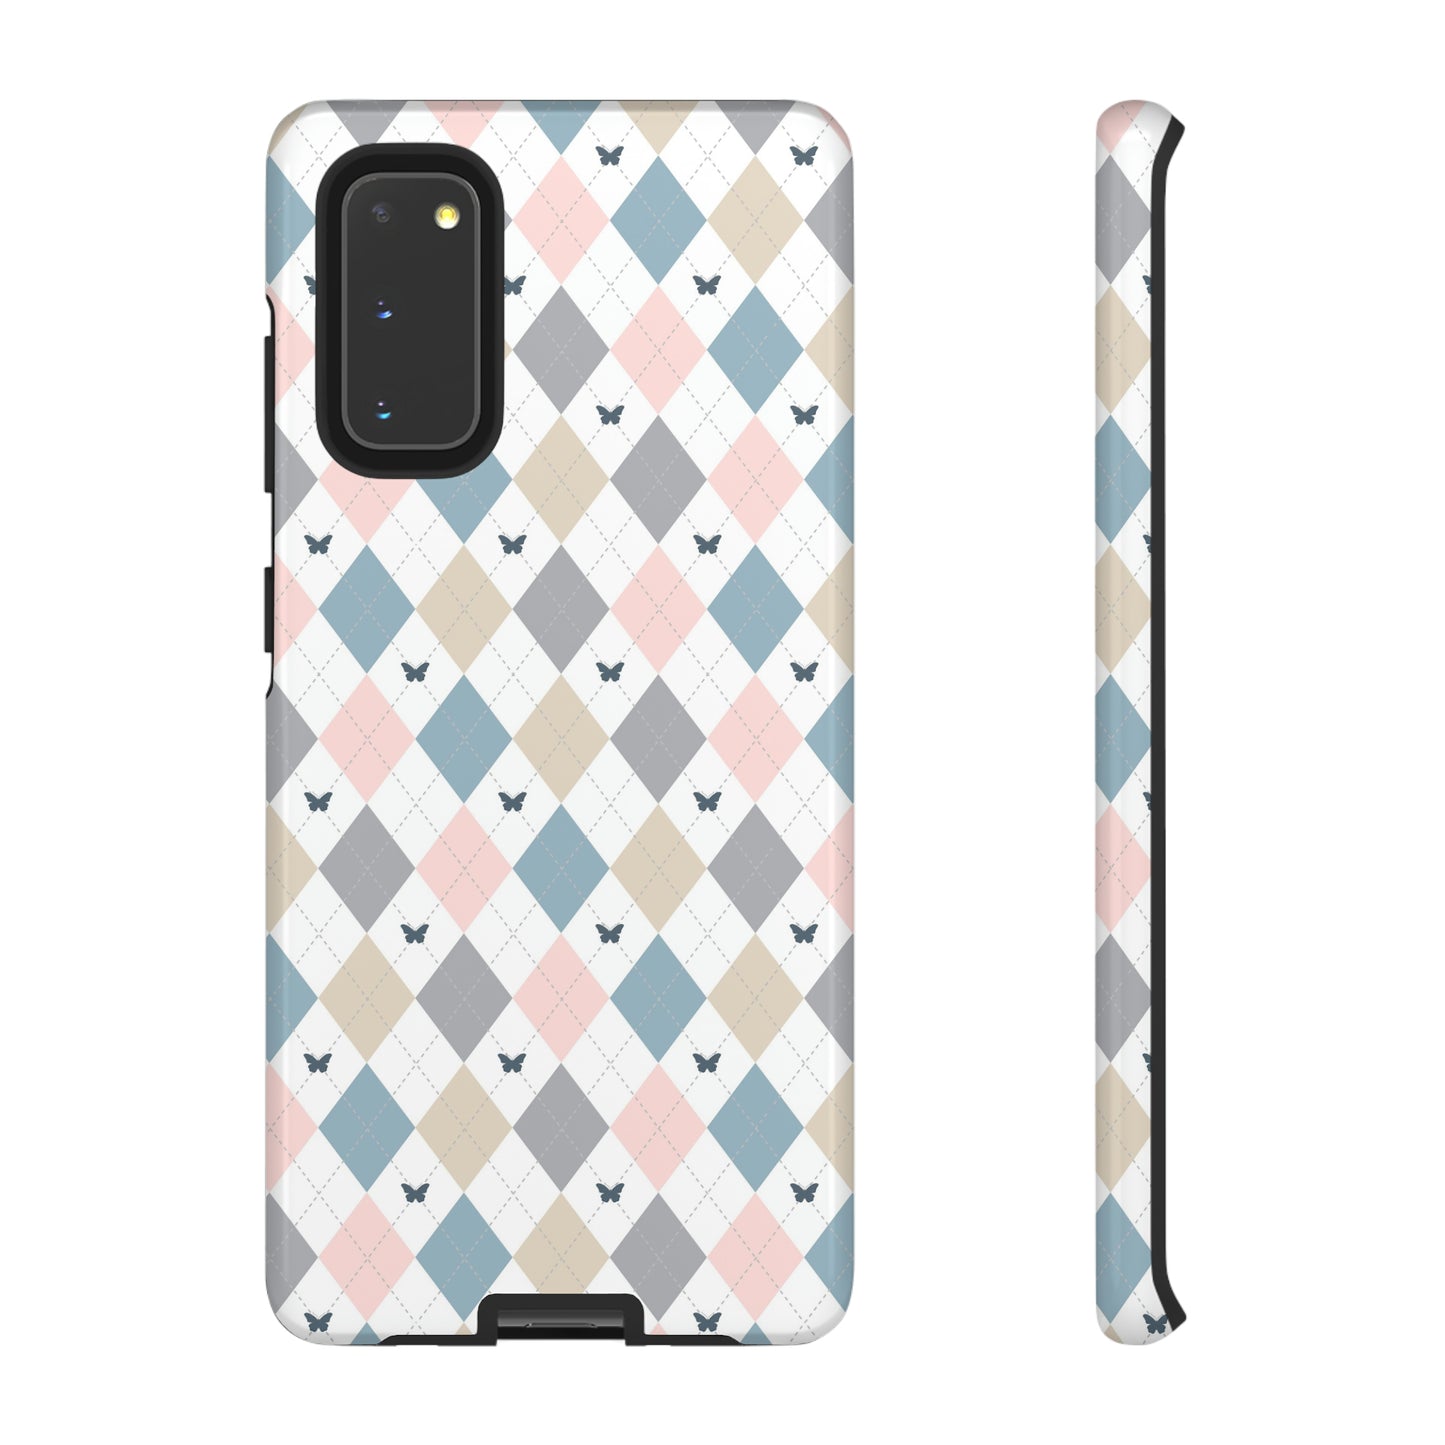 Argyle Pastel Plaid and Butterflies print design Tough Phone Case compatible with a large variety of Samsung models